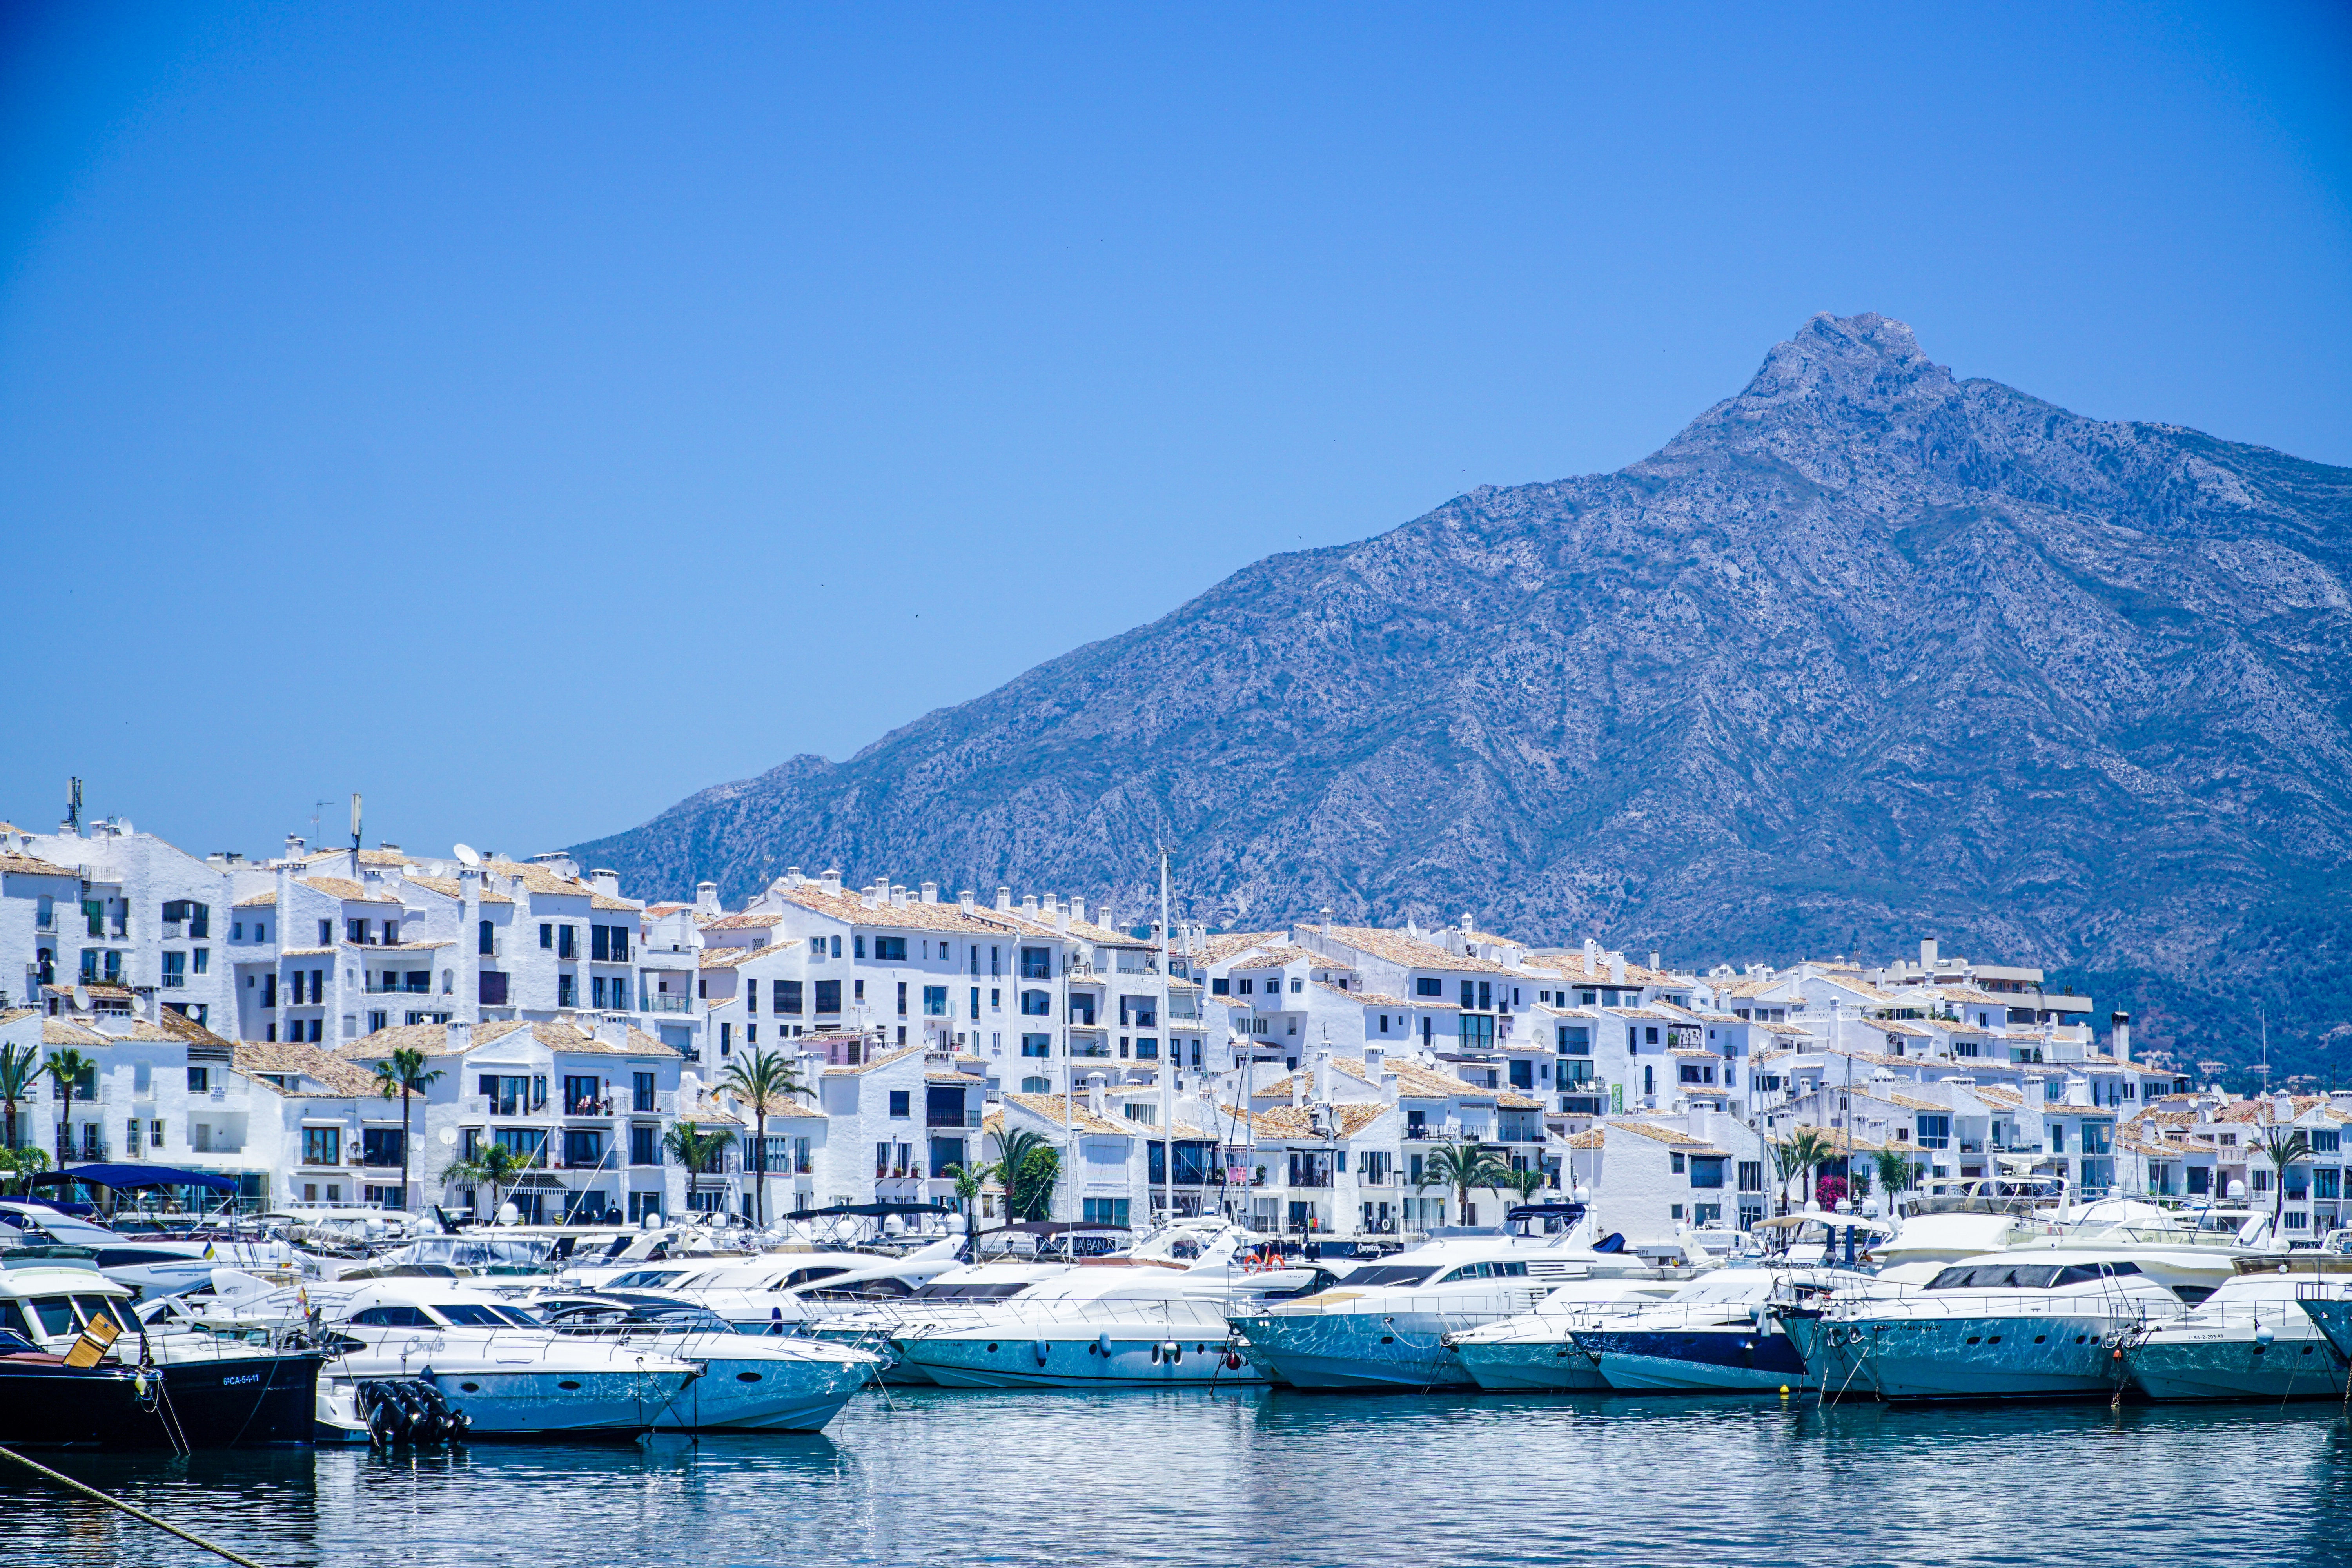 Marbella is known for having celebrities and other wealthy individulas visit yearly